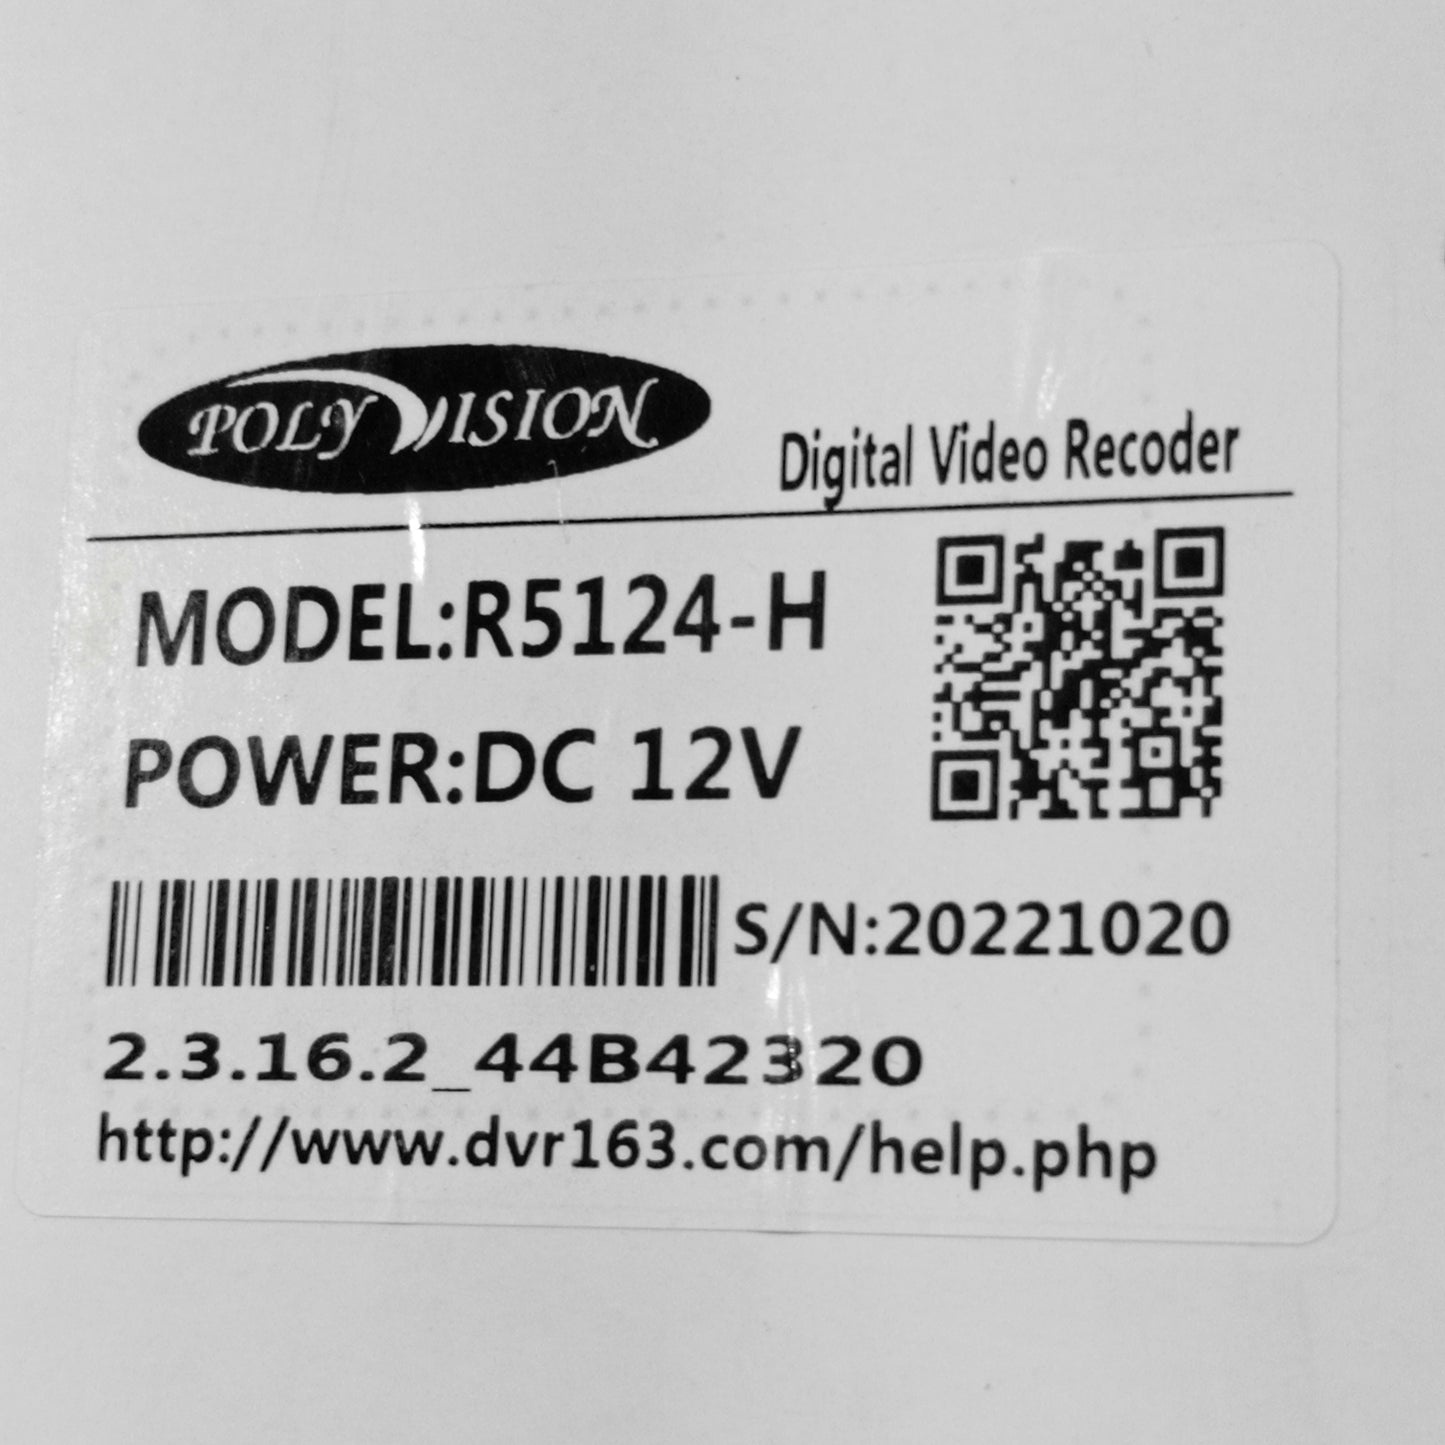 POLYVISION 24-Channel 5-in-1 High Definition DVR (Supports IP, AHD, CVI, HD, TVI cameras) - model number sticker